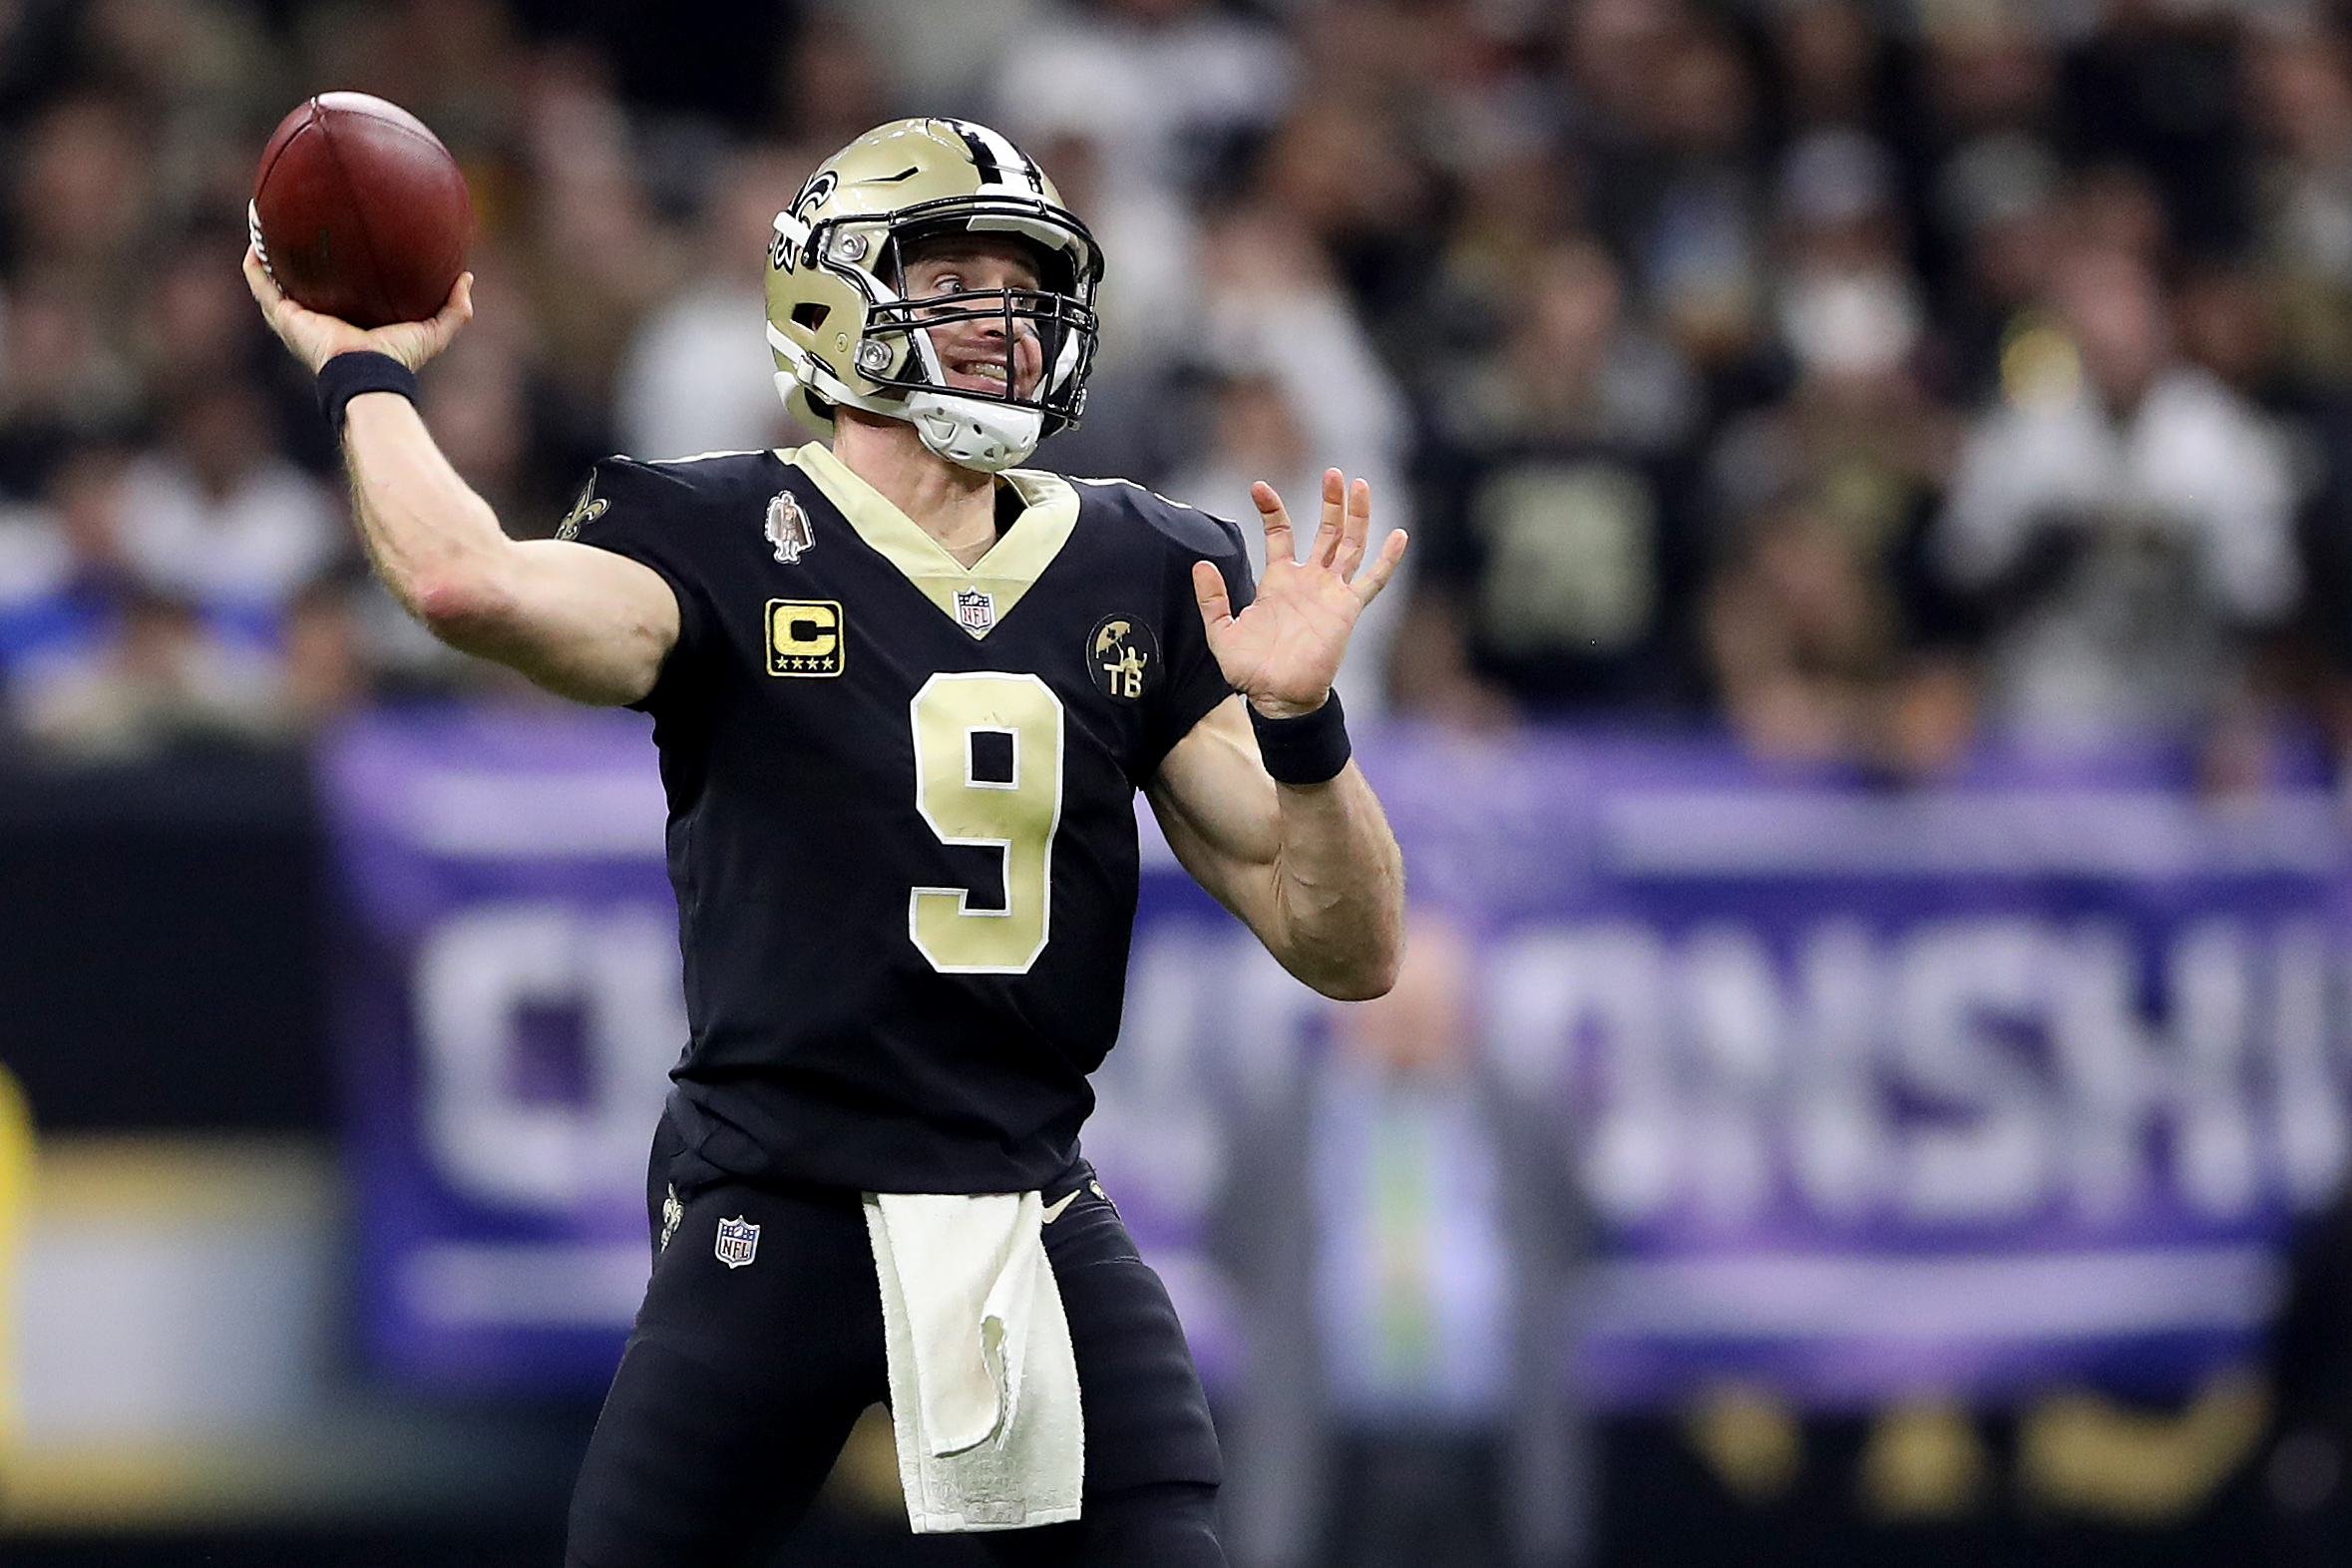 NFL 2019 Monday Night Football Schedule: Full Slate of MNF Games